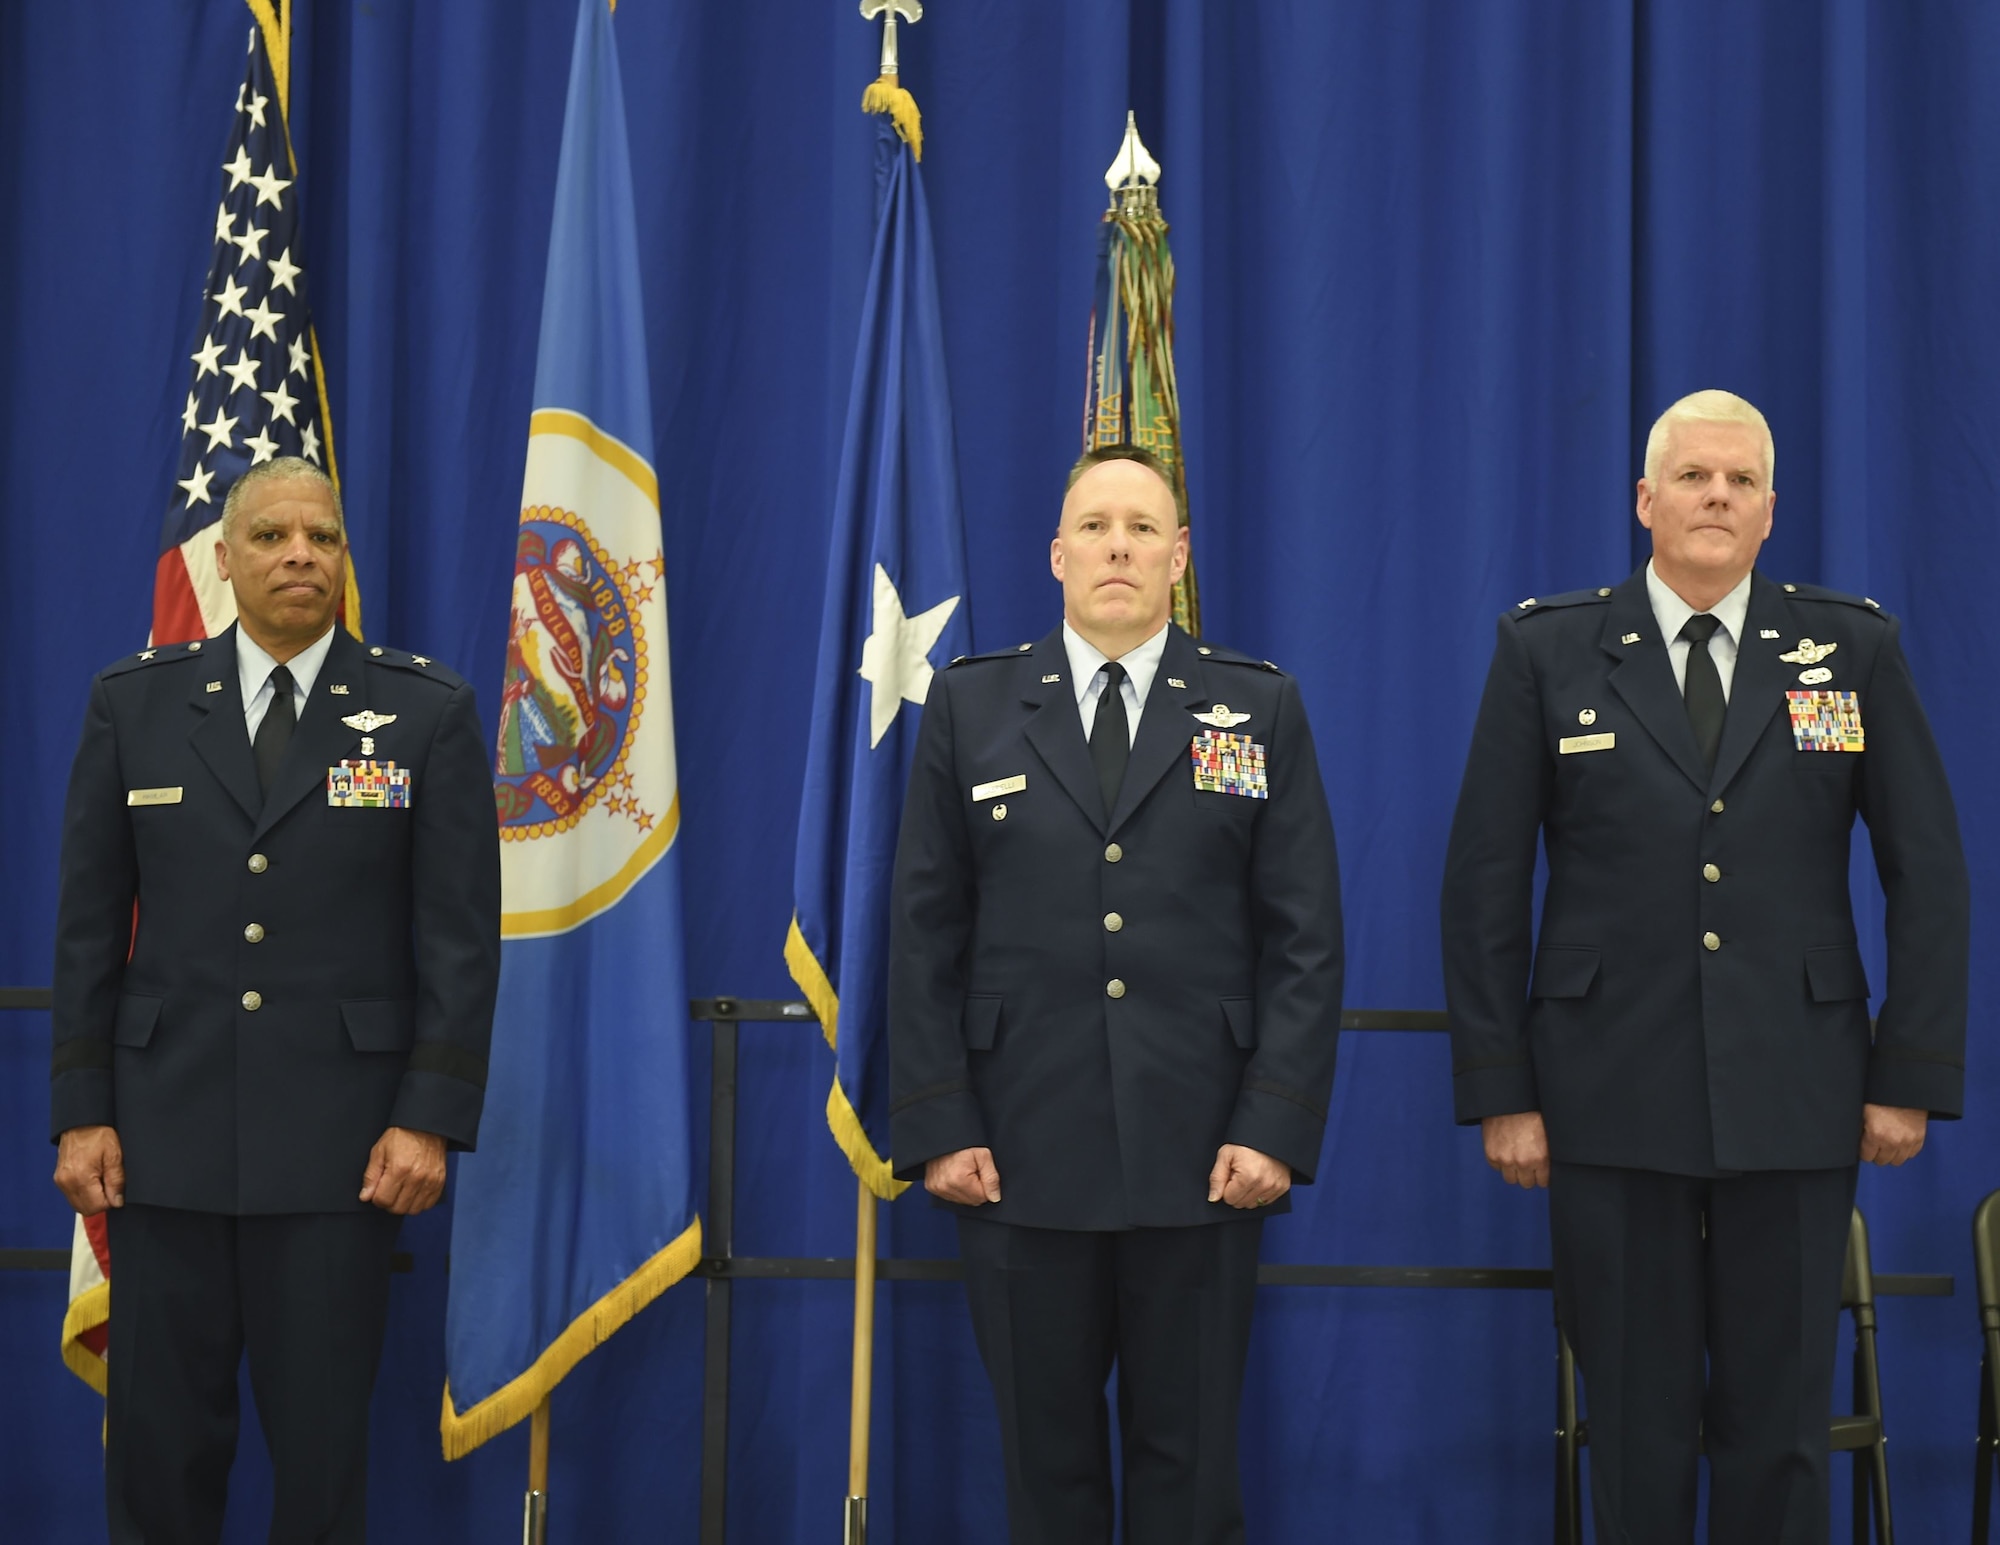 U.S. Air Force Col. Daniel Gabrielli, right, receives command of the 133rd Airlift Wing from Brig. Gen. David Hamlar, Assistant General Air National Guard, in St. Paul, Minn., Apr. 16, 2016.